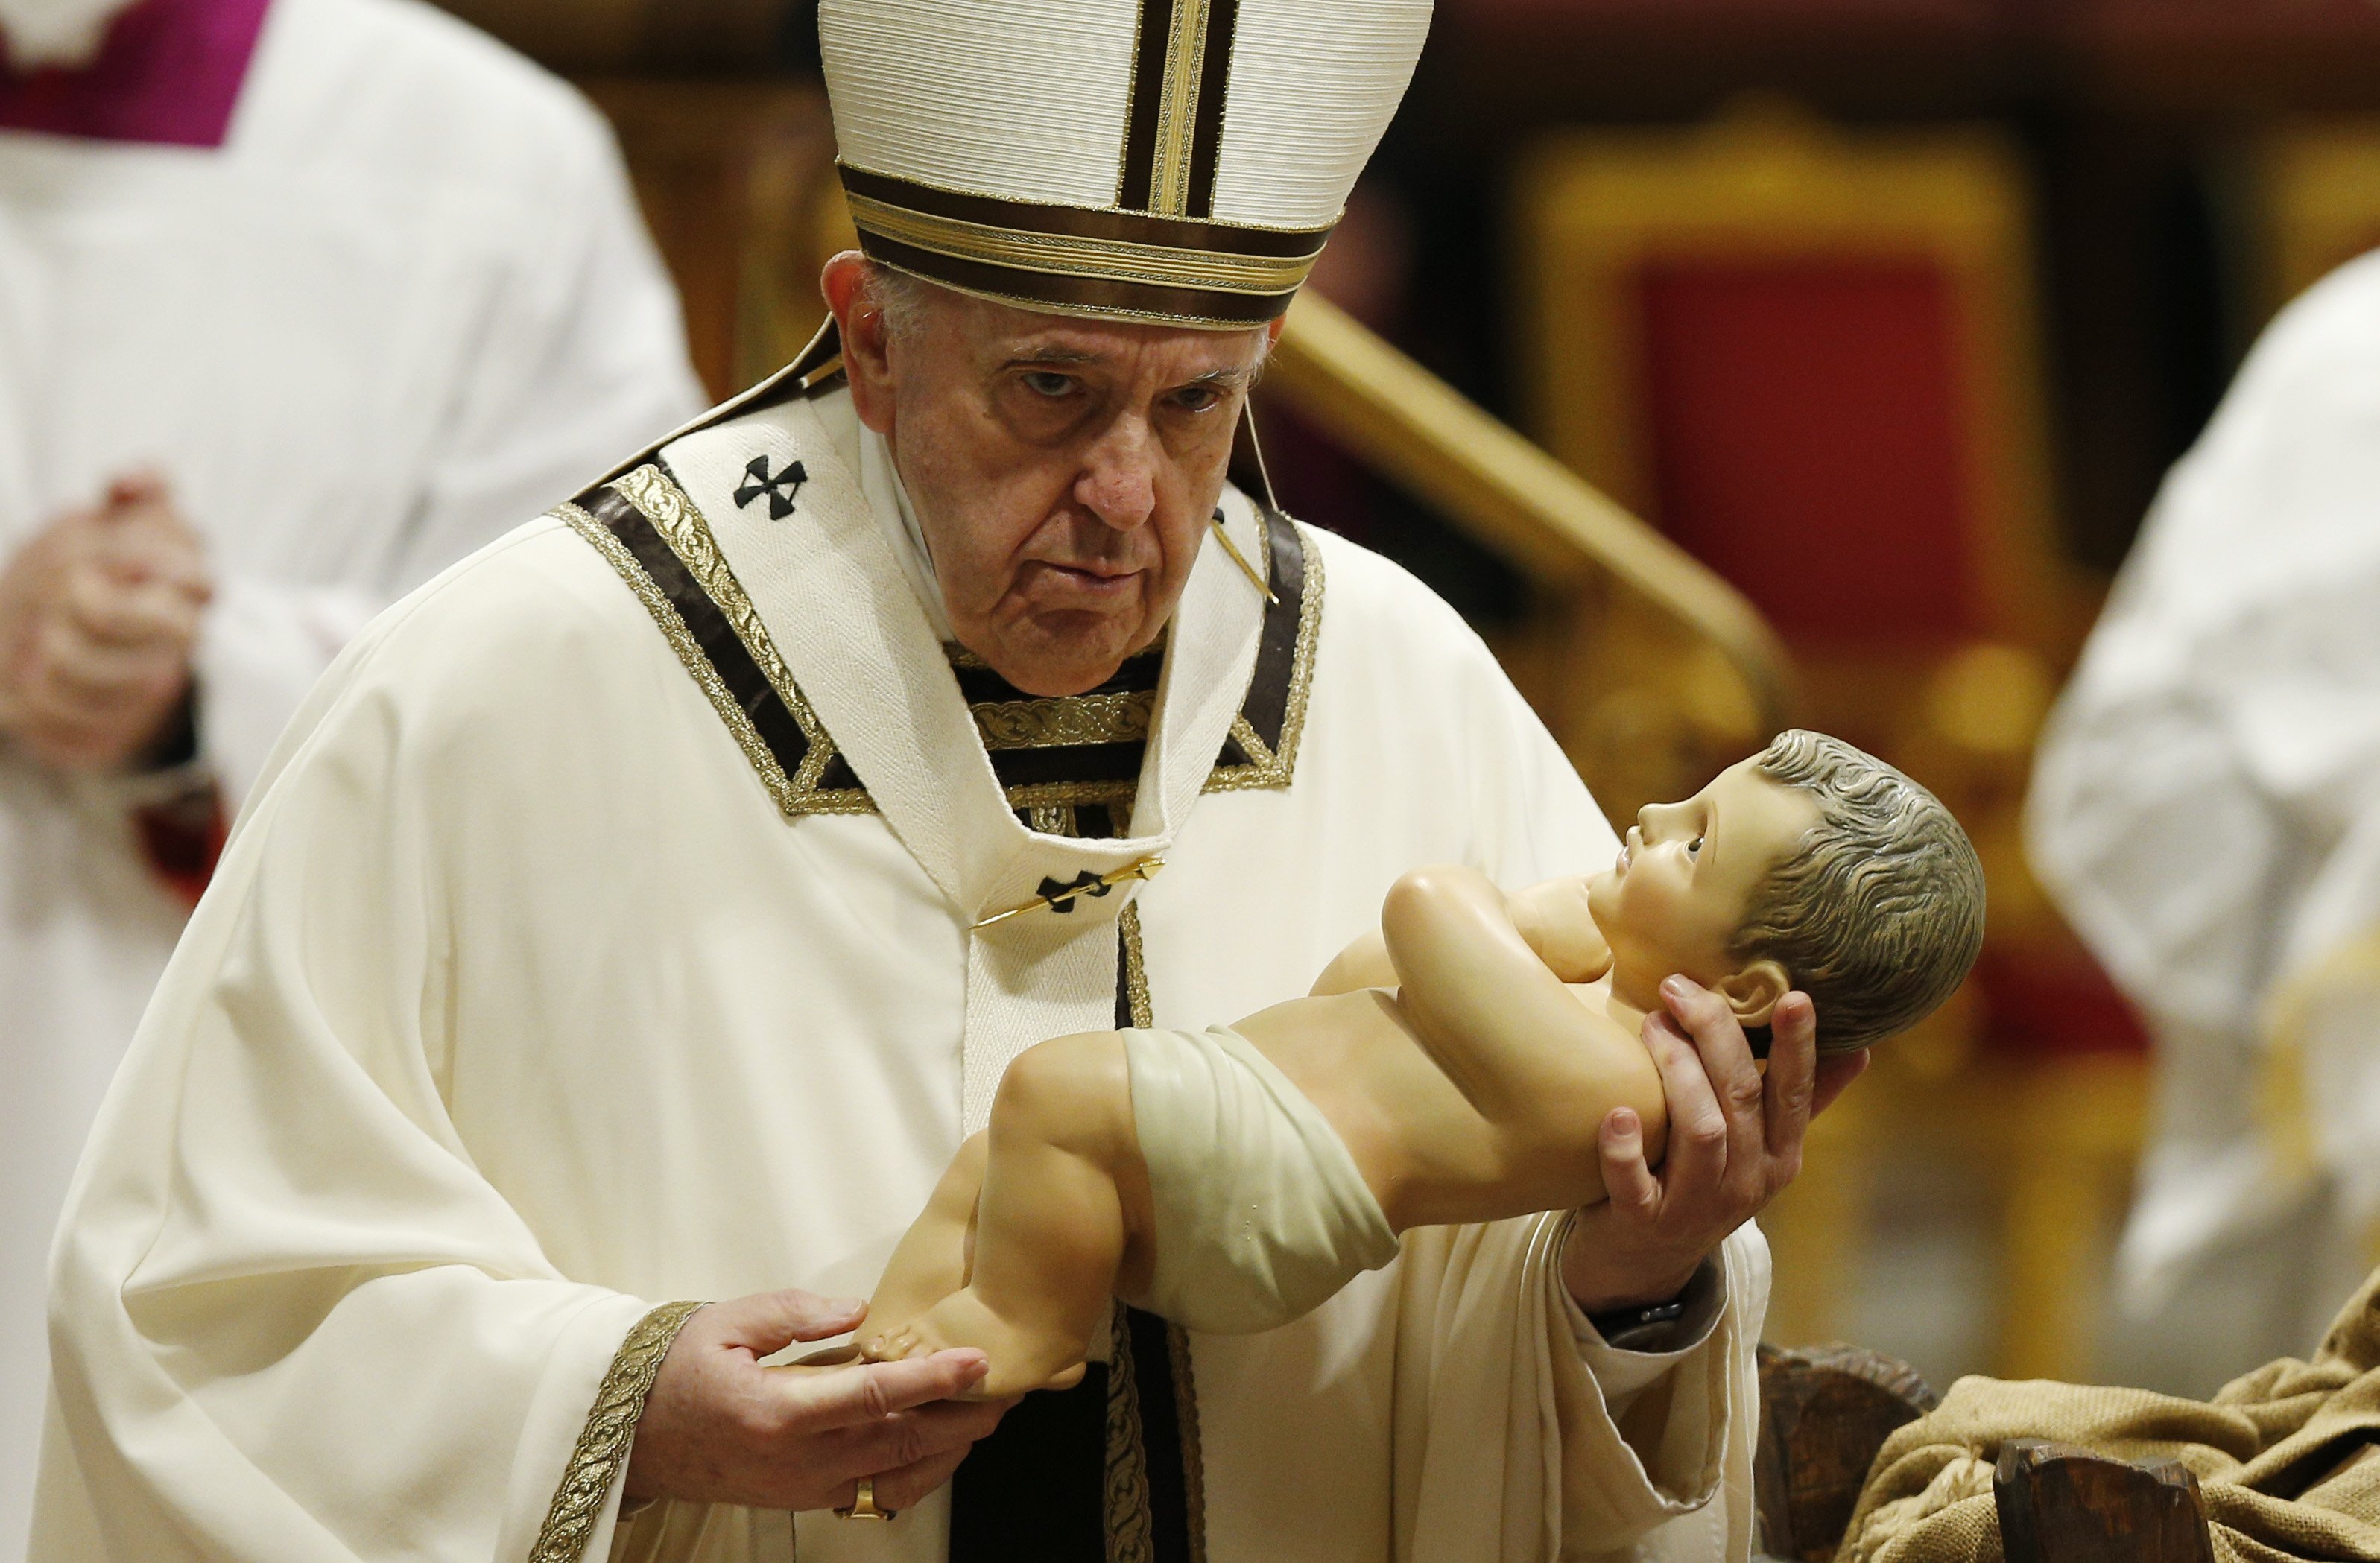 Pope Francis carries a figurine of the baby Jesus at the conclusion of Christmas Eve Mass in St. Peter's Basilica at the Vatican in this Dec. 24, 2021, file photo. (CNS/Paul Haring)